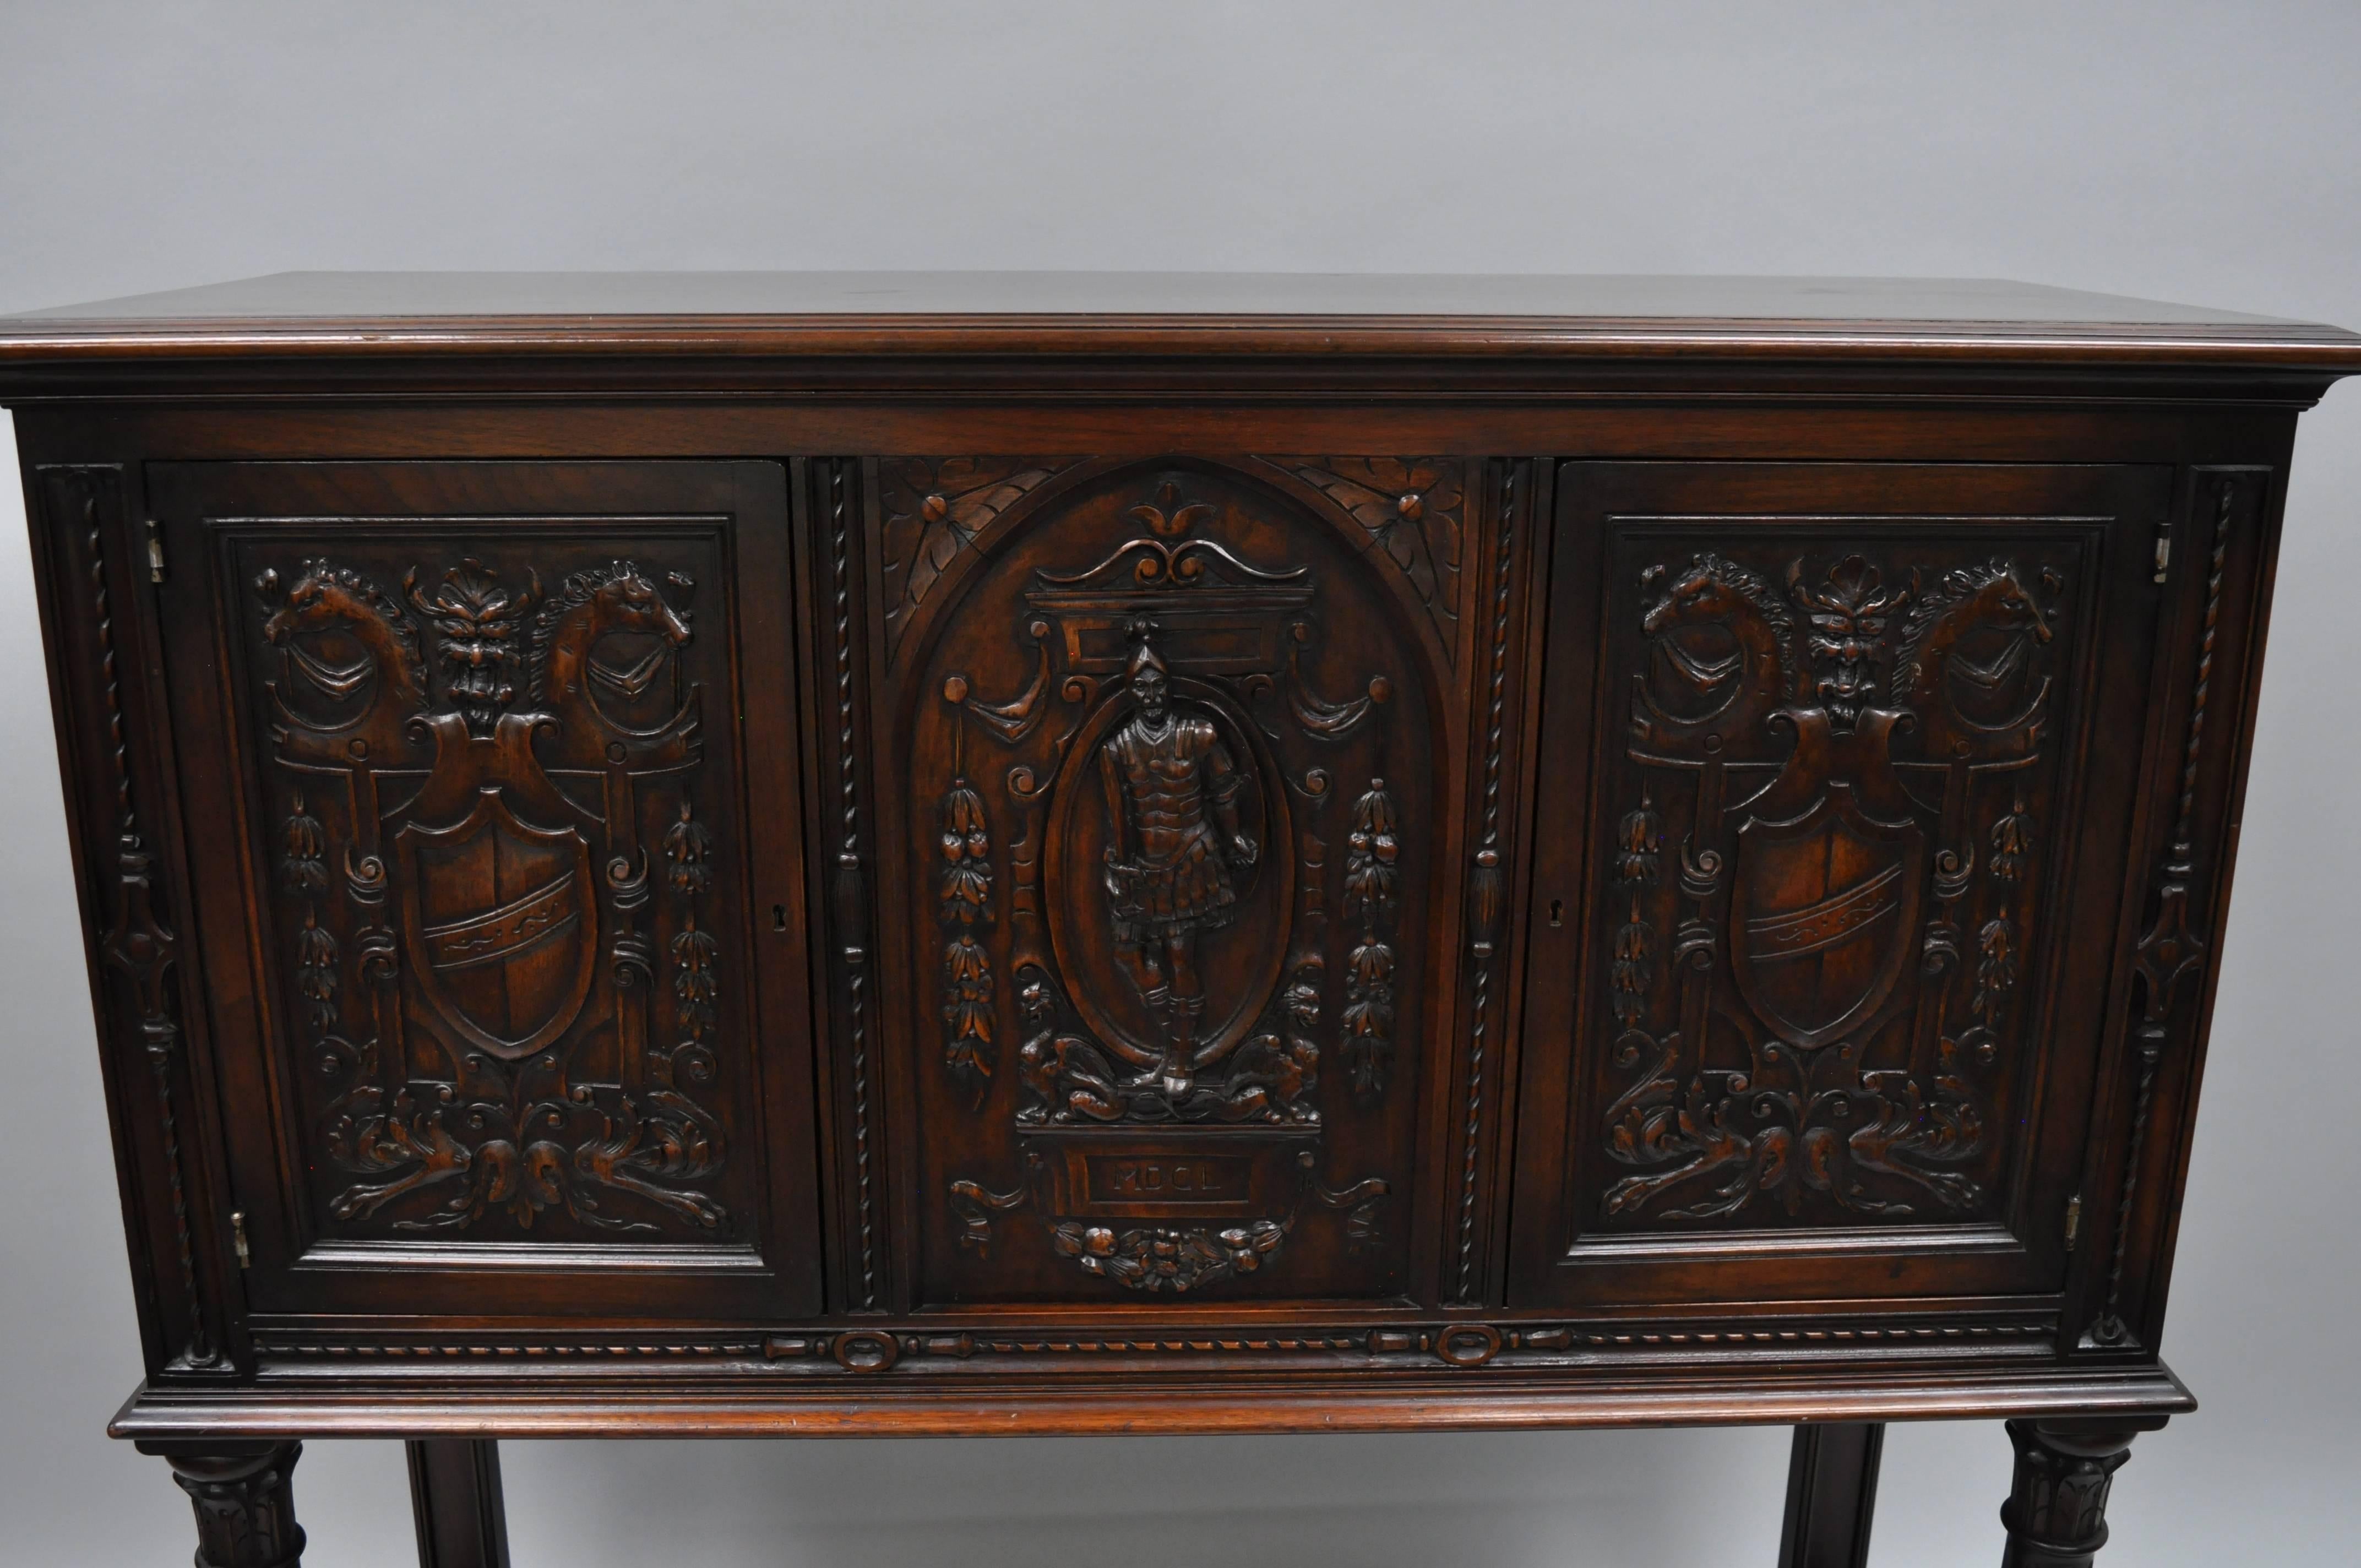 Antique Renaissance Revival figural carved walnut cabinet. Item features ornately carved walnut panels of shields and crests, horse heads, as well a central soldier. Cabinet has two swing doors, carved support columns, lower shelf, panel back, and